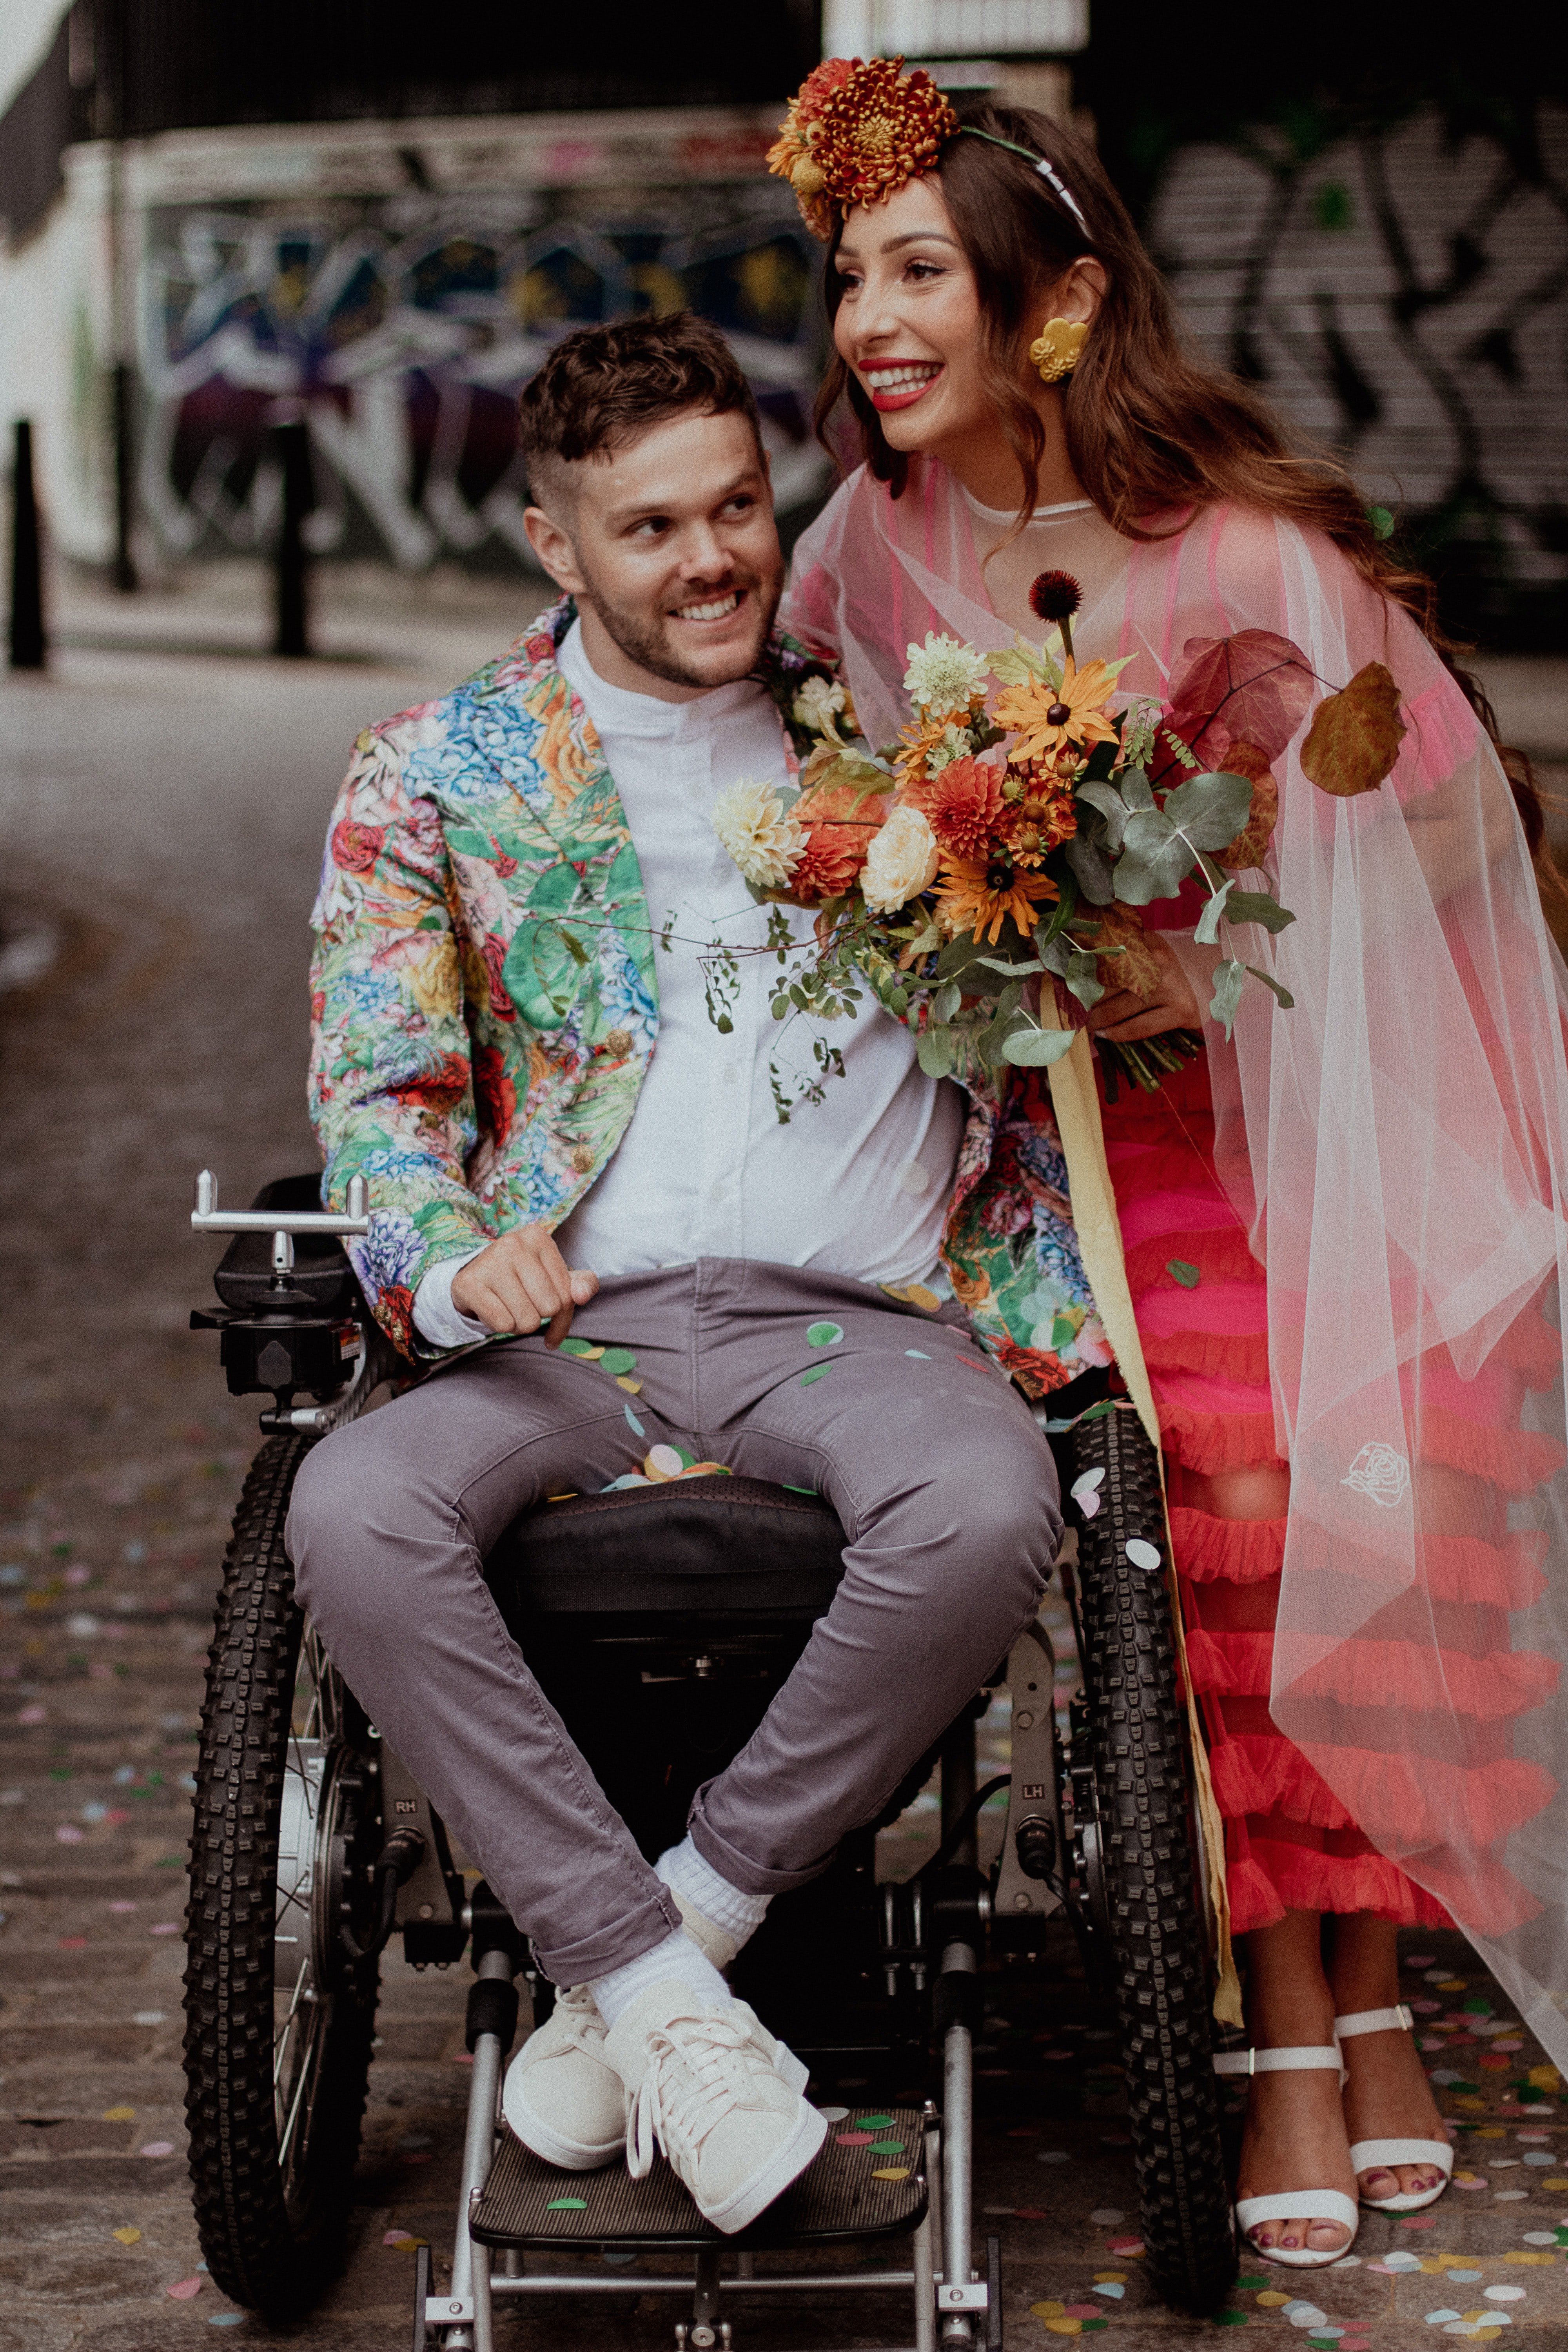 A month later, Ellie and Curtis were married in the hospital. | Source: Unsplash